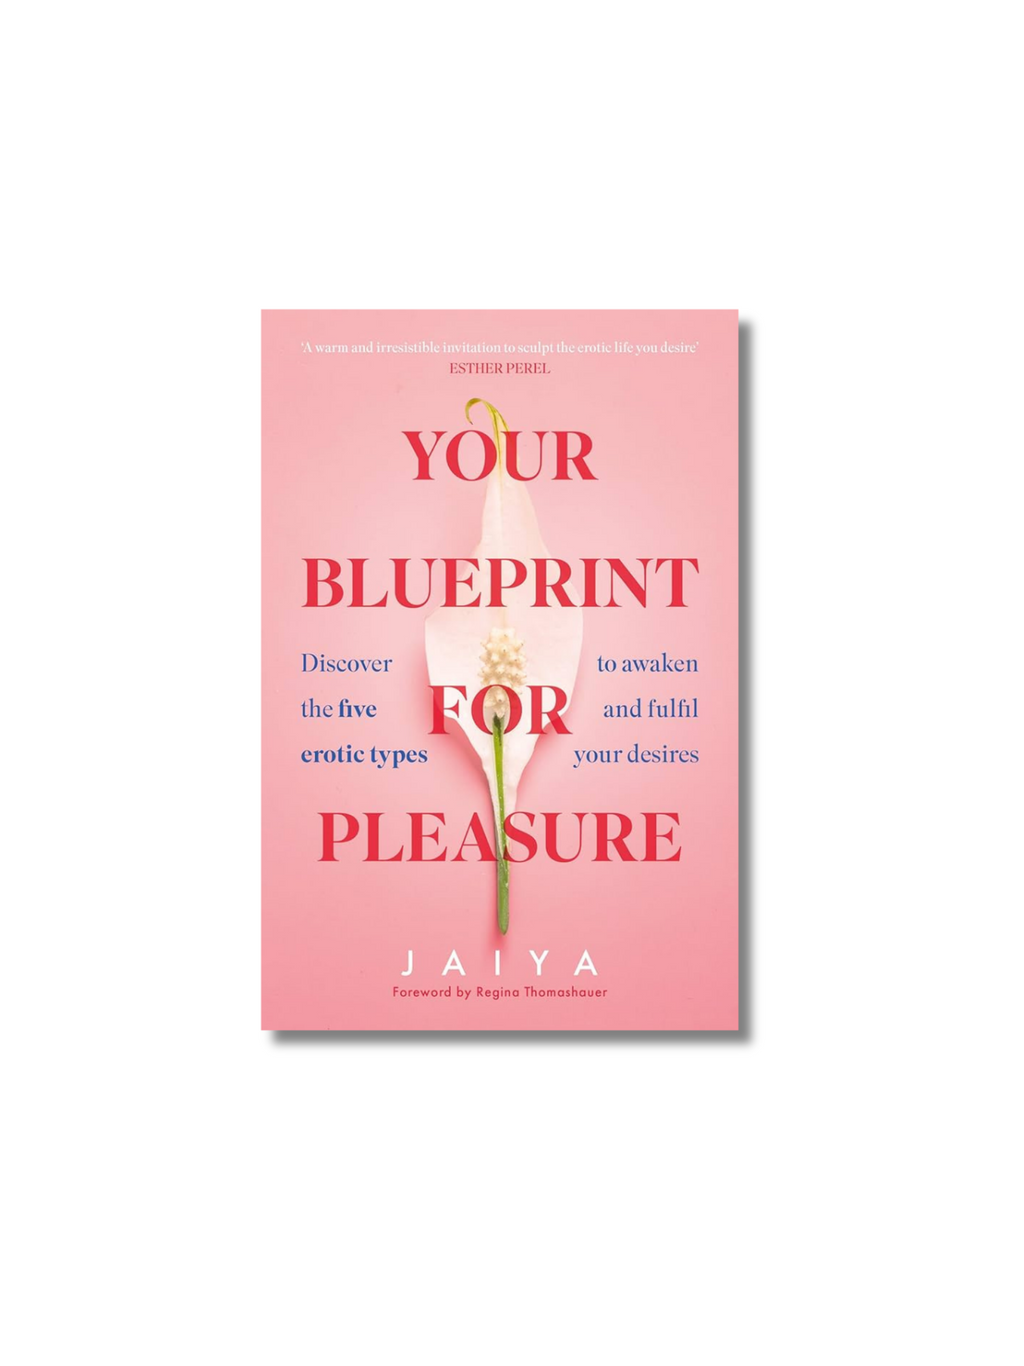 Your Blueprint for Pleasure: Discover the 5 Erotic Types to Awaken